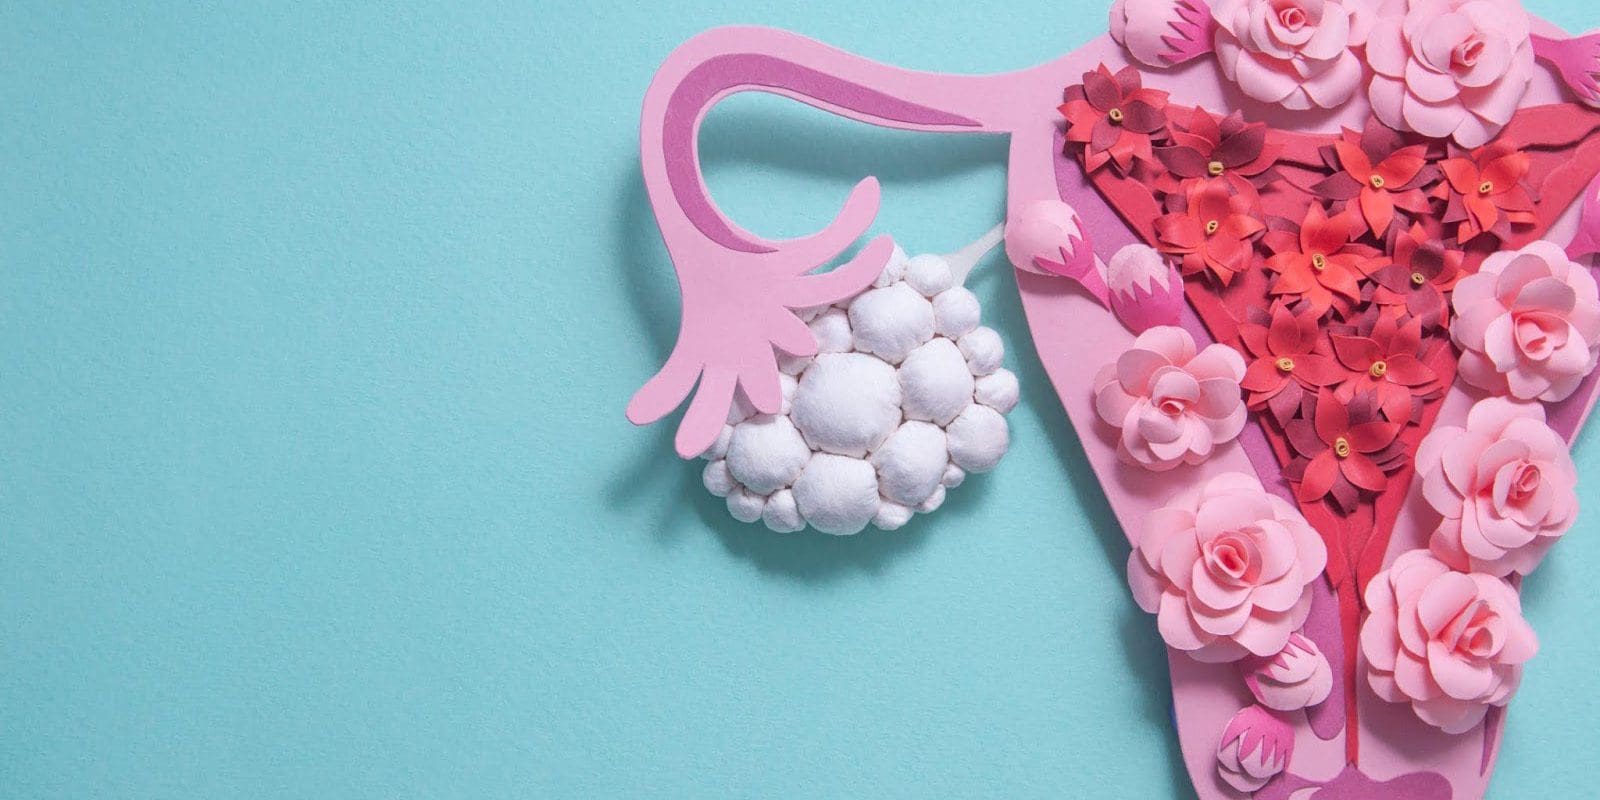 A paper flower sculpture representing polycystic ovaries and a uterus